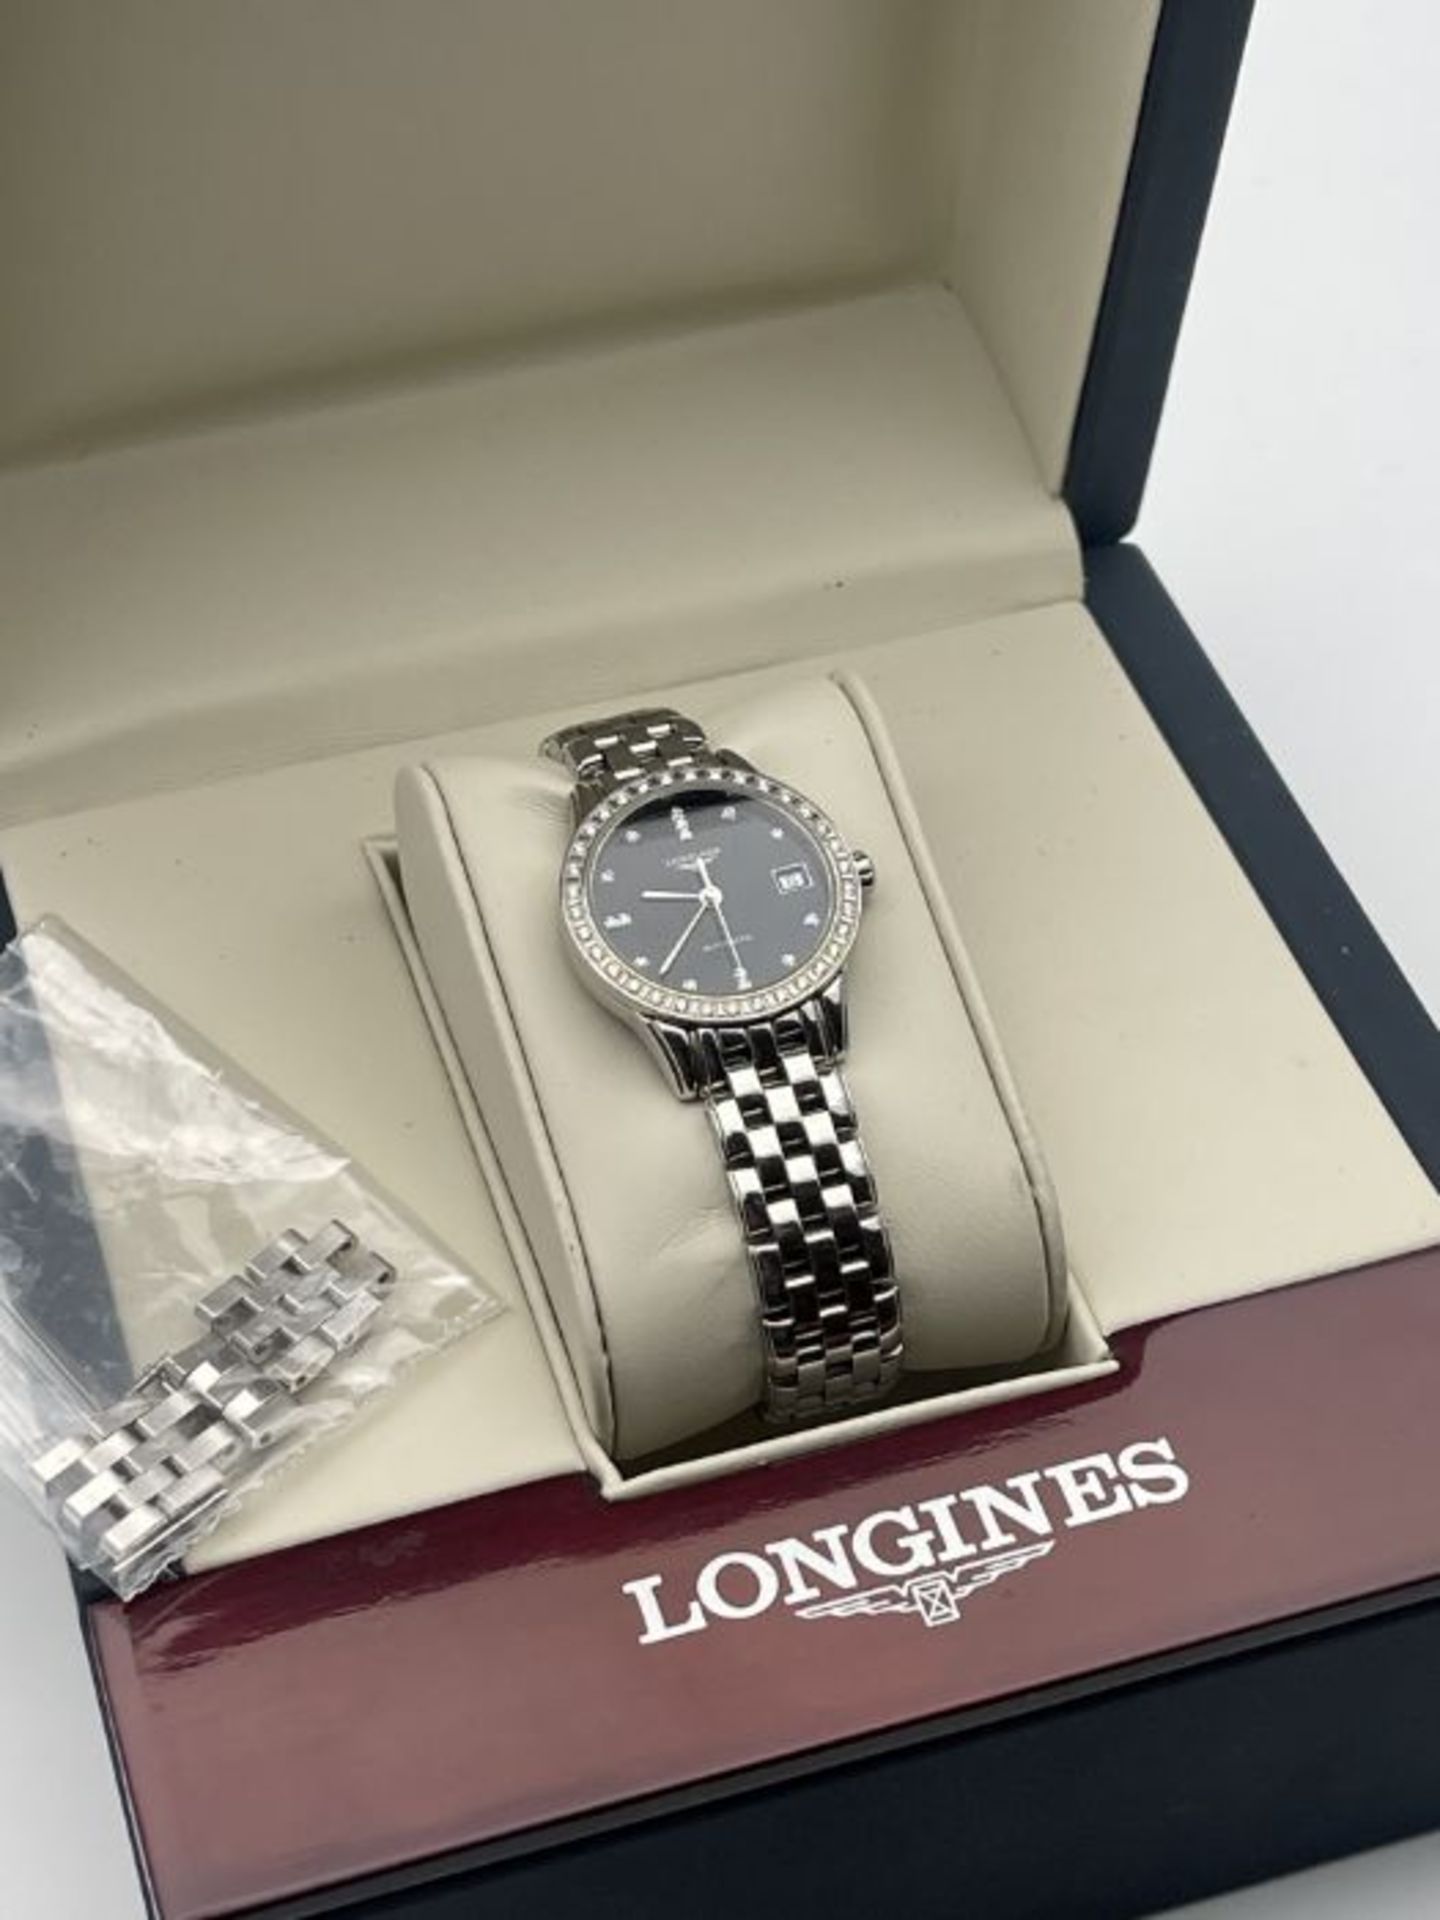 LONGINES AUTHENTIC FLAGSHIP WOMEN'S AUTOMATIC DIAMOND WATCH L42740 - Image 4 of 4